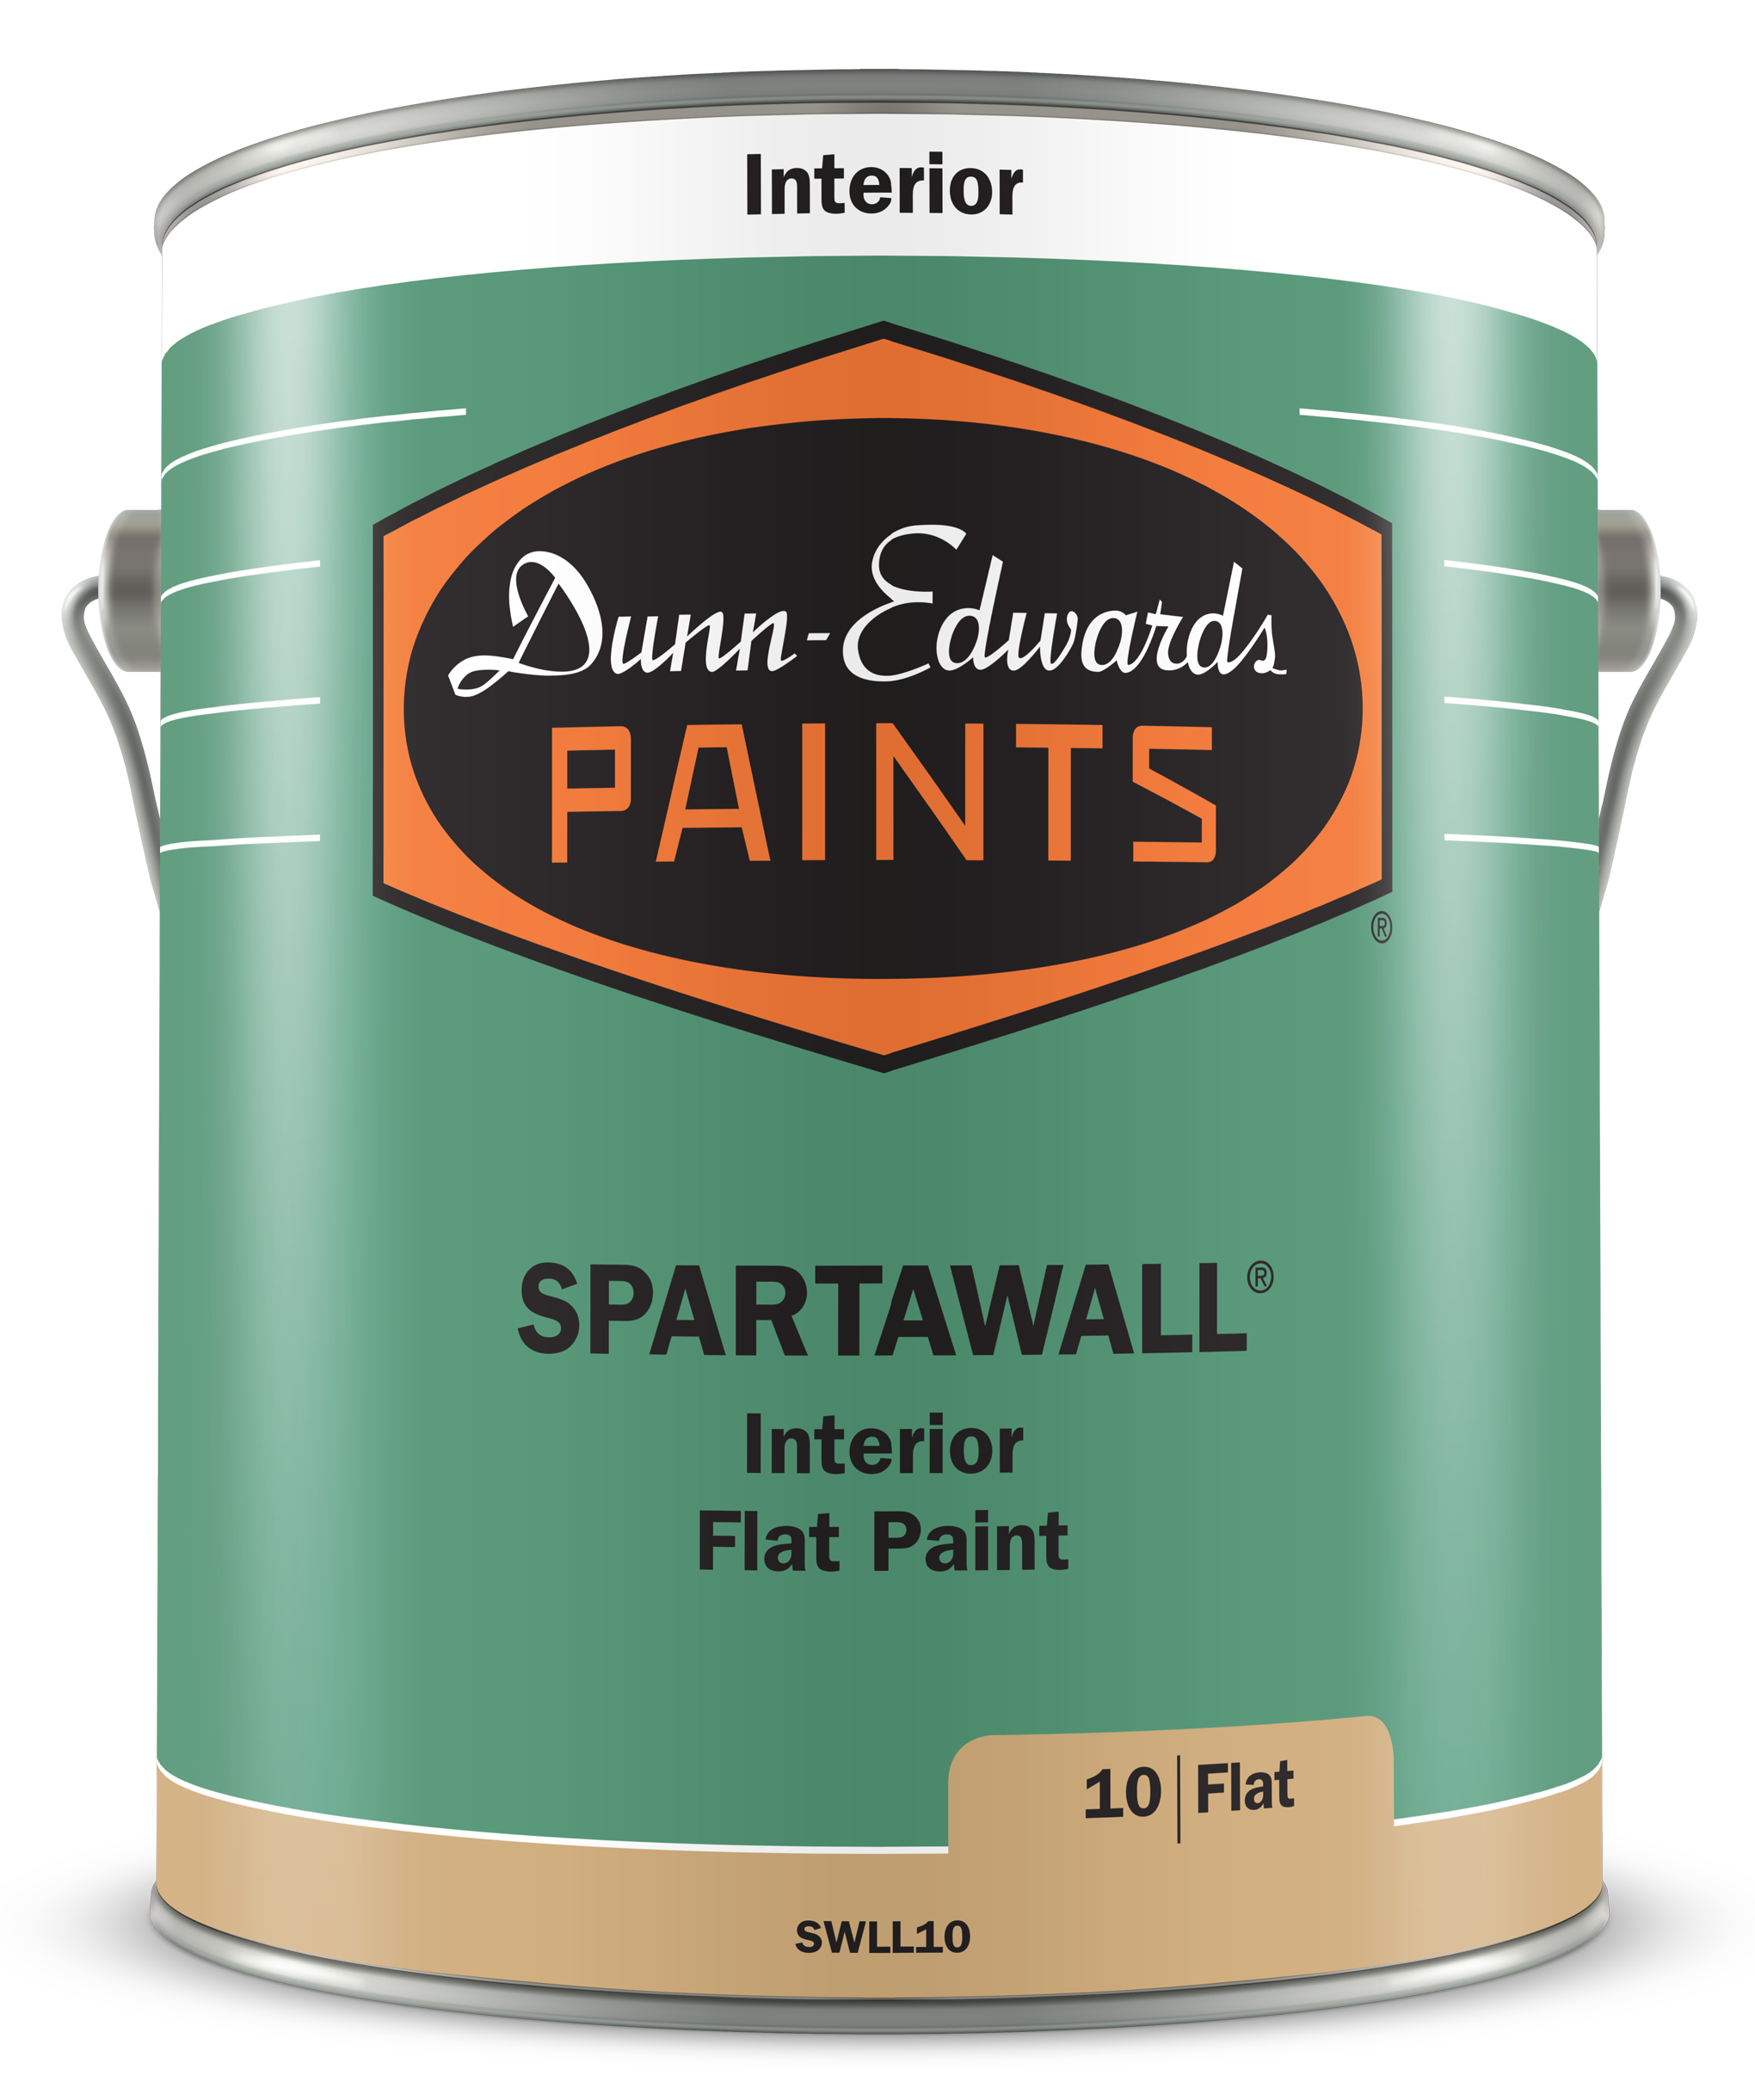 SPARTAWALL Interior Flat Paint Can